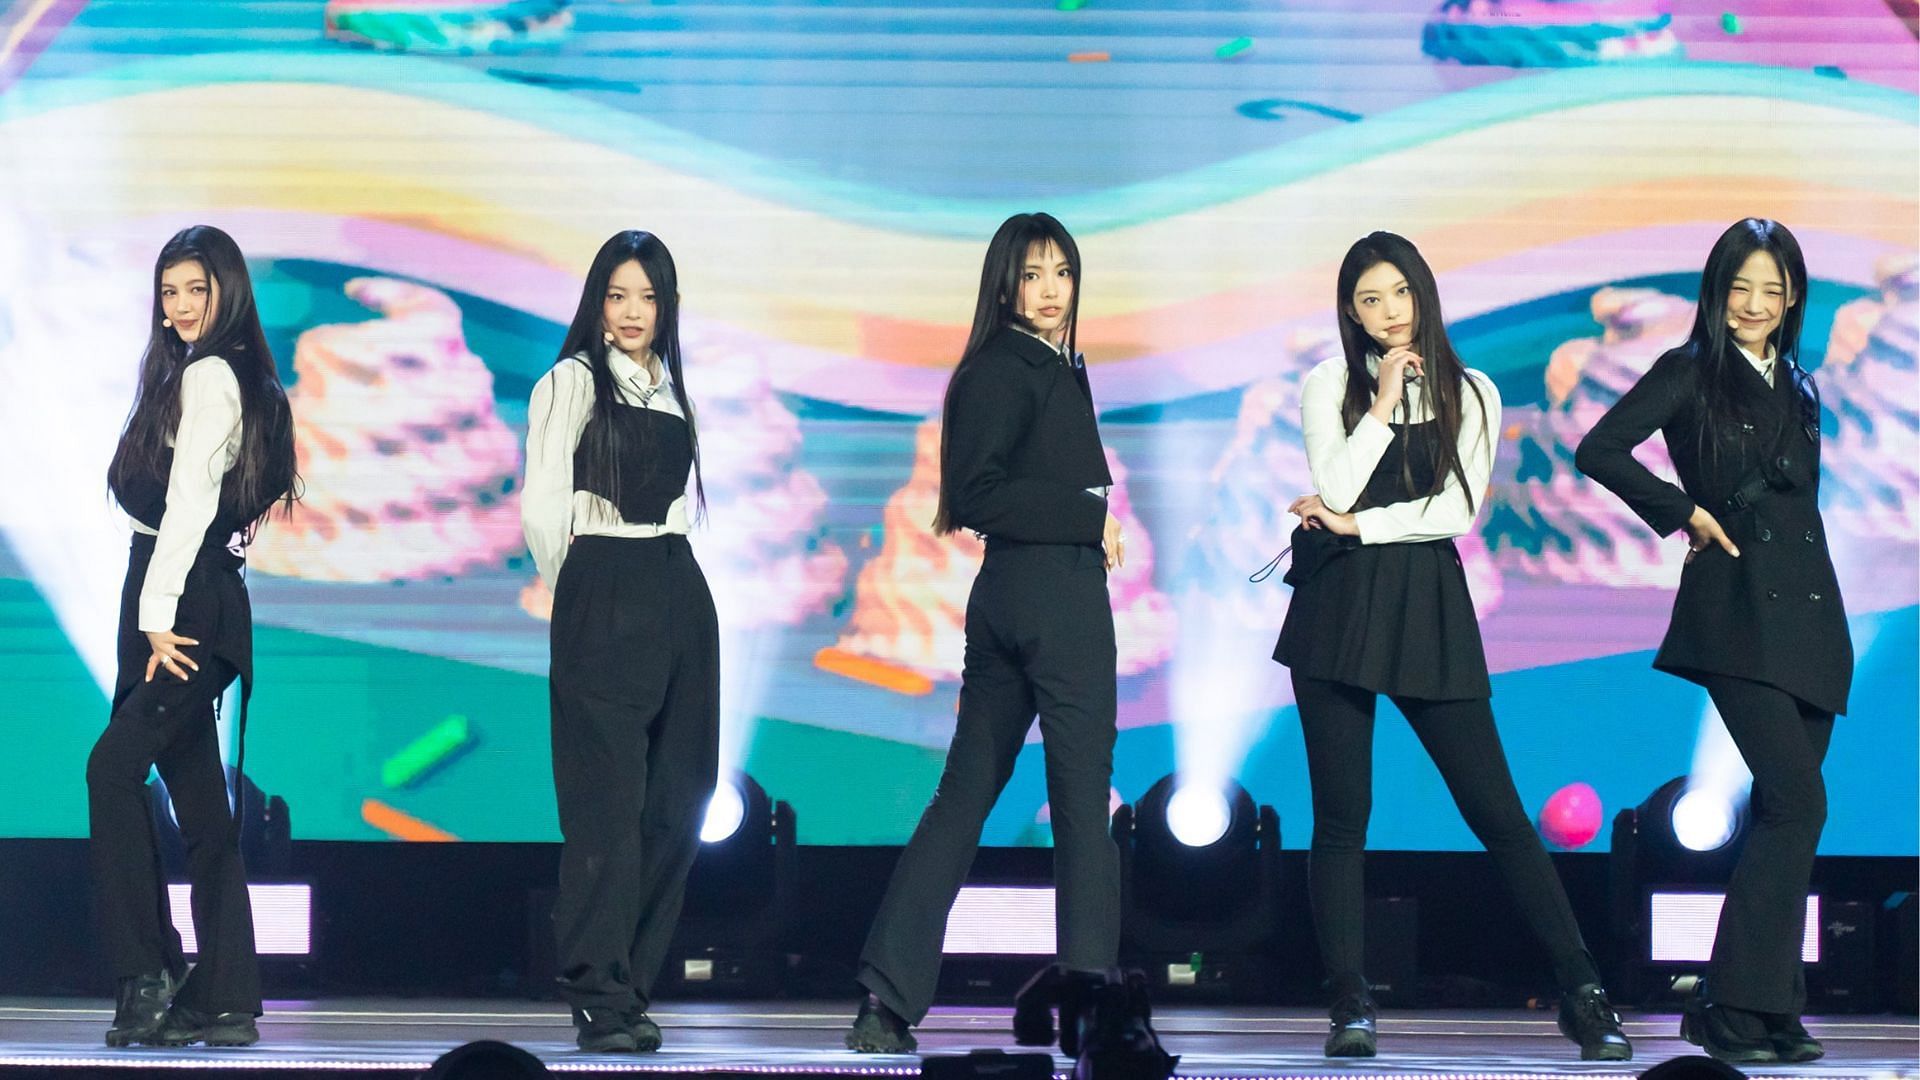 newjeans pics on Twitter  New jeans style, Stage outfits, Kpop outfits